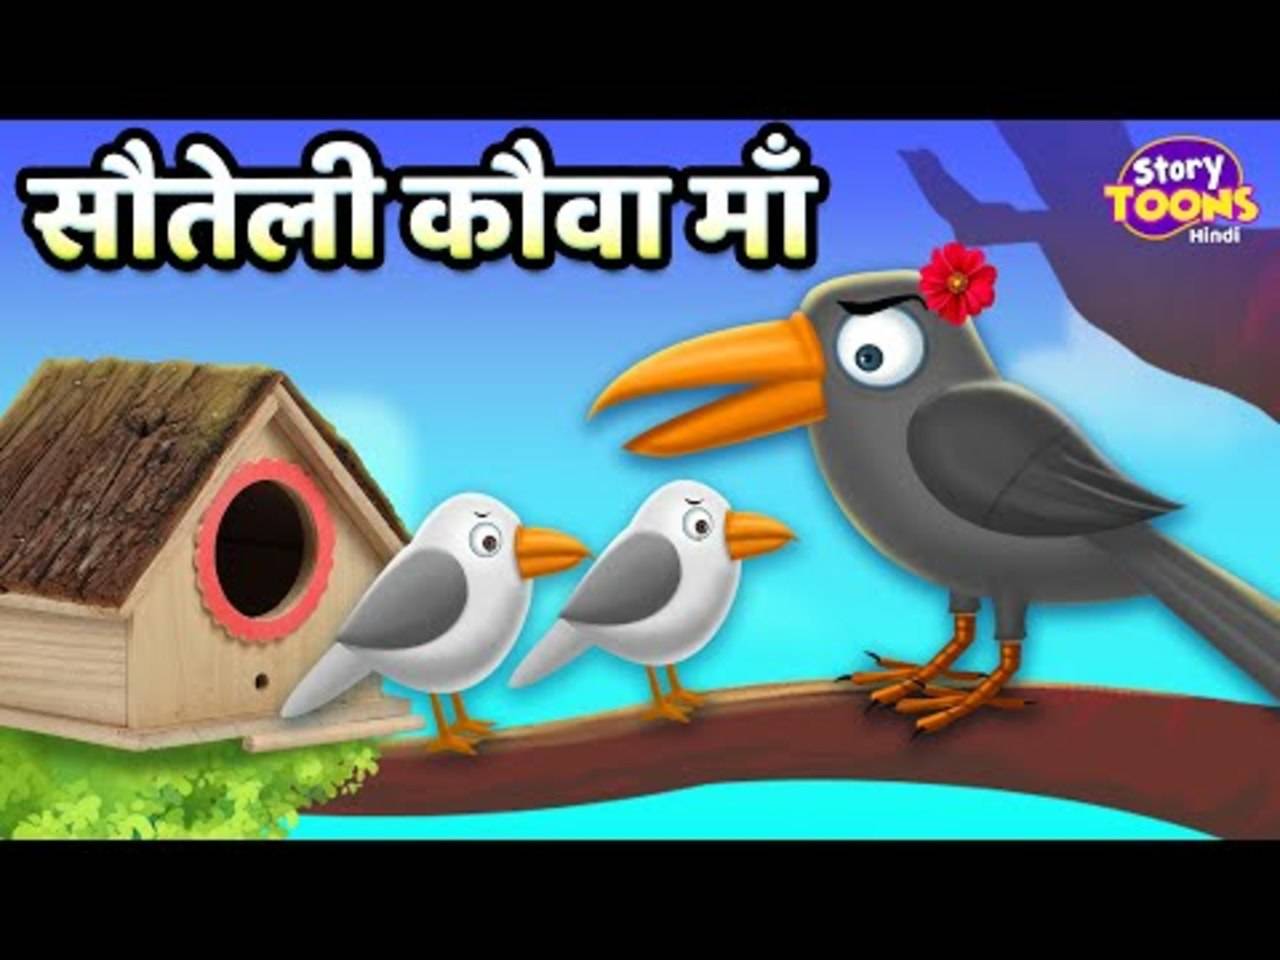 Popular Kids Songs and Hindi Nursery Story 'Sauteli Kauva Maa' for Kids -  Check out Children's Nursery Rhymes, Baby Songs, Fairy Tales In Hindi |  Entertainment - Times of India Videos